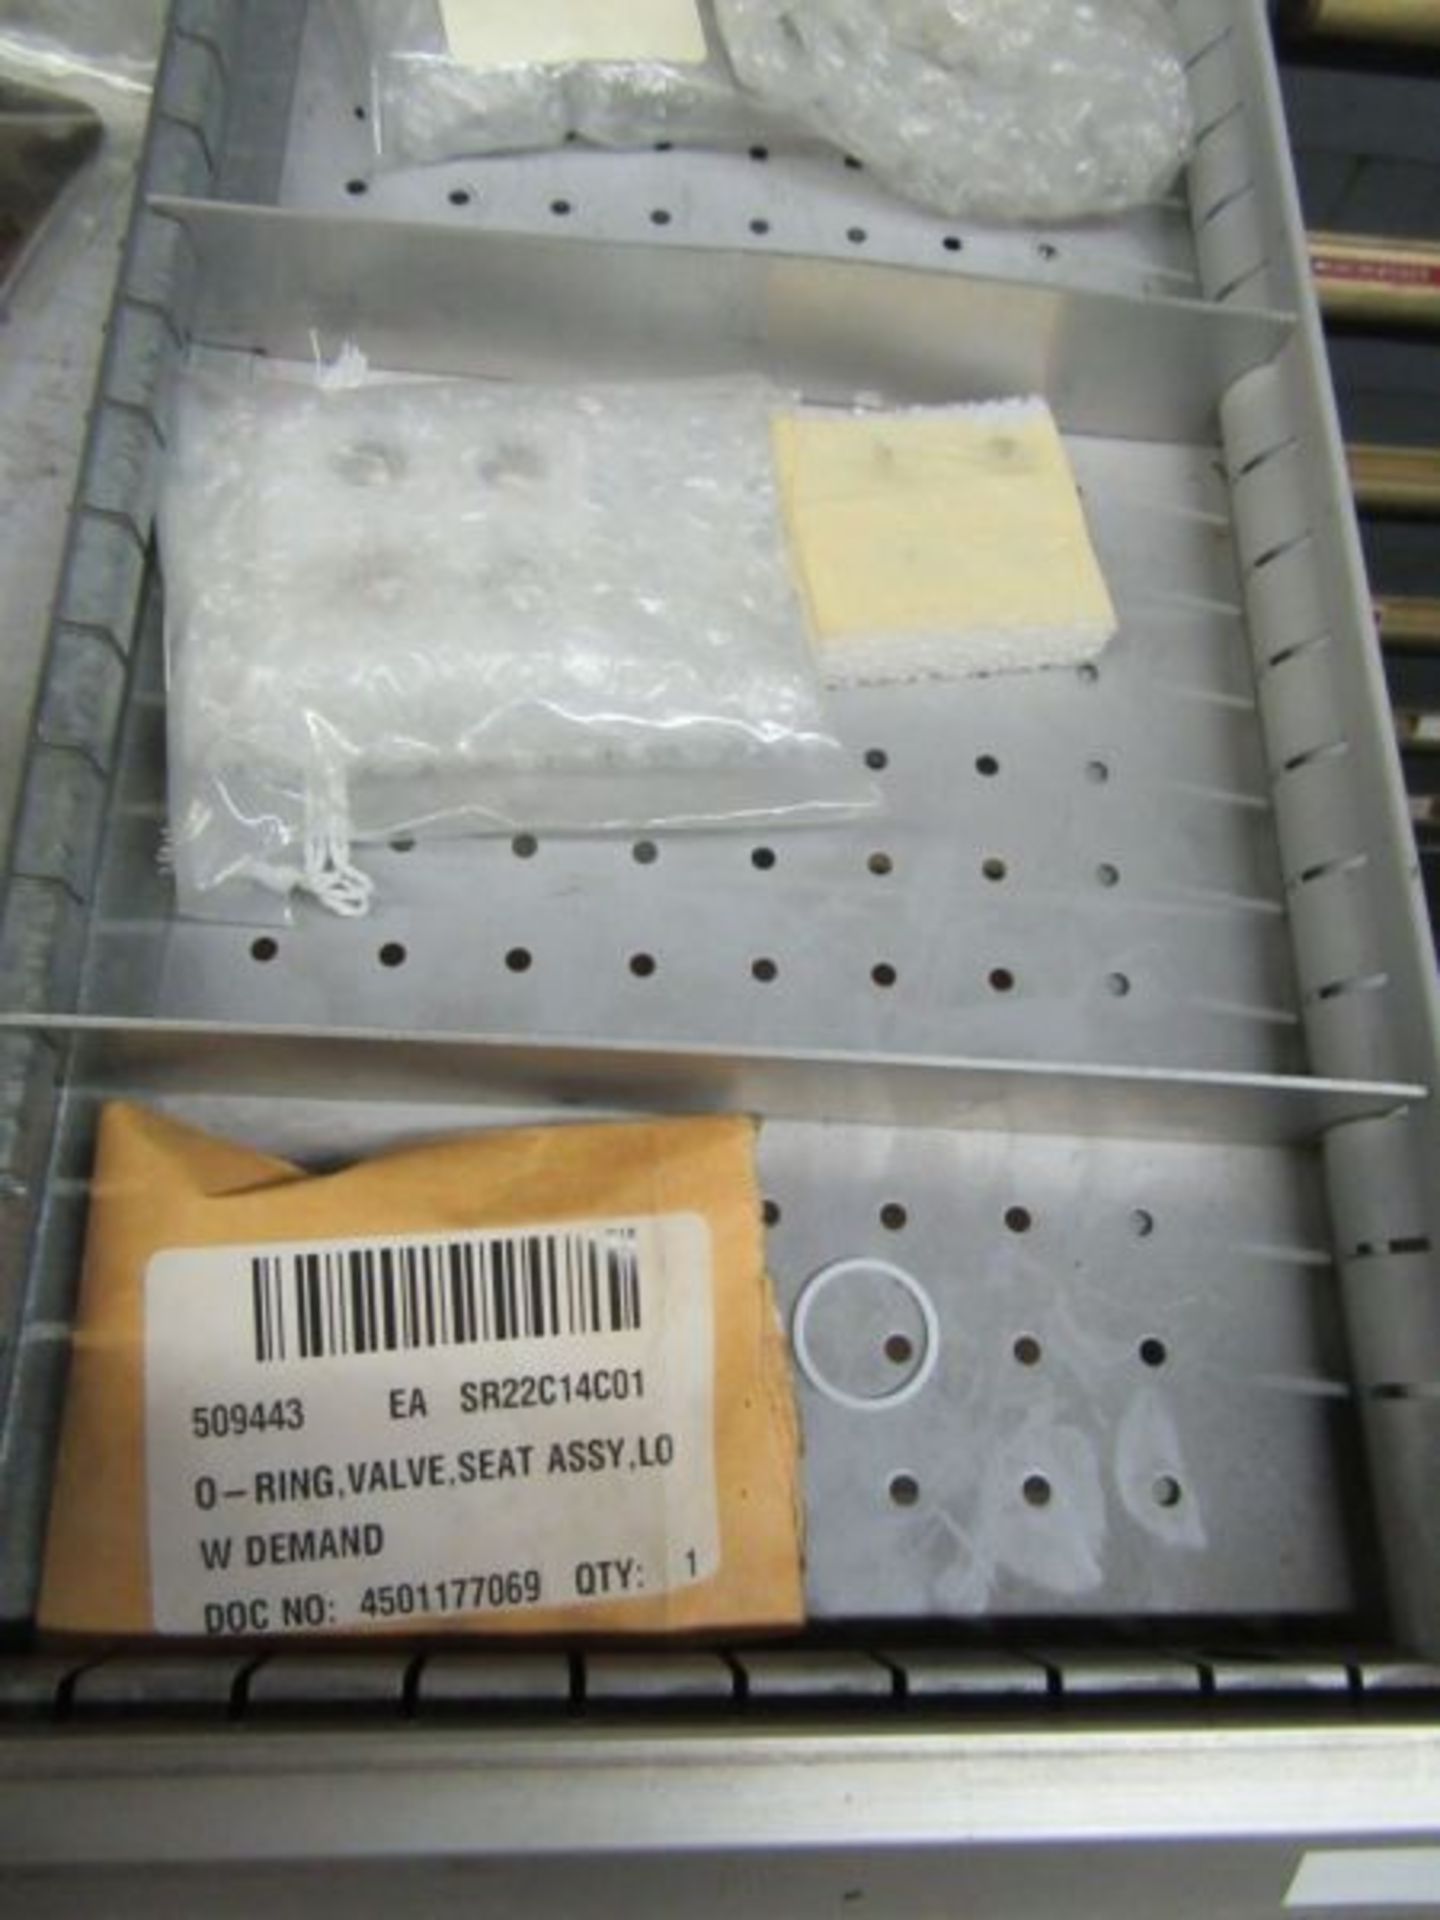 CONTENTS OF CABINET - SEAT VALVES, O RING VALVES, GASKET, MOTHER BOARD PART… - Image 4 of 10